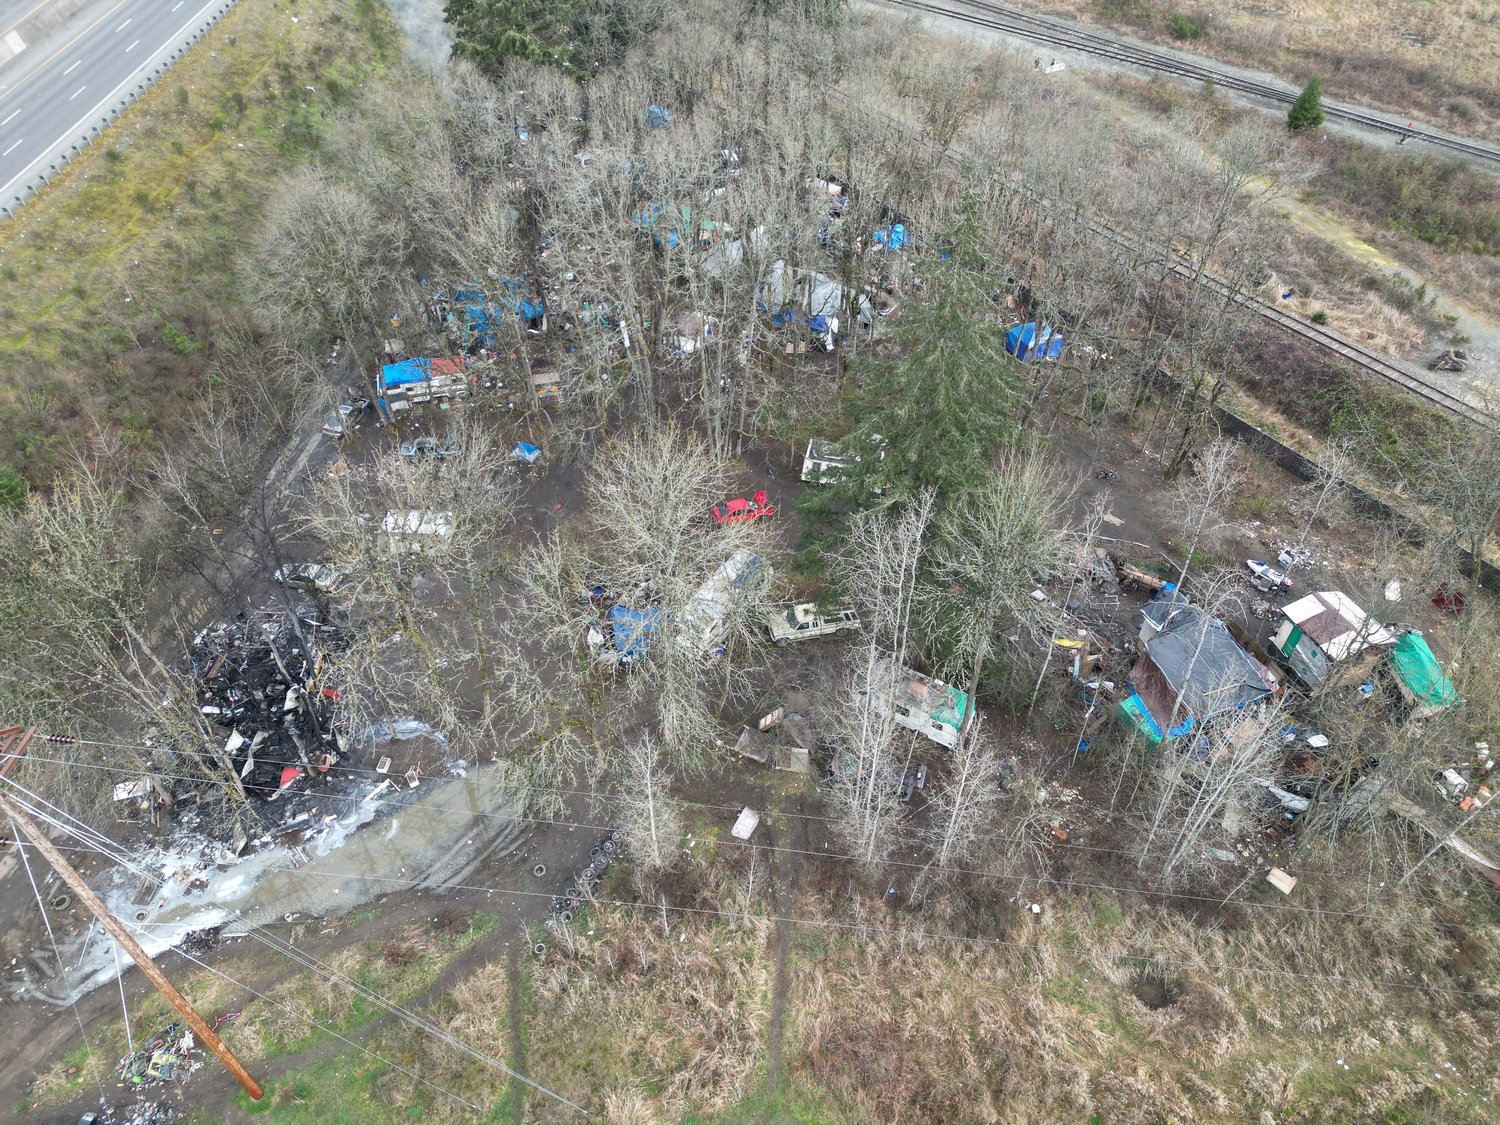 The encampment at Blakesless Junction in Centralia where a fire broke out on Wednesday night is pictured from above.